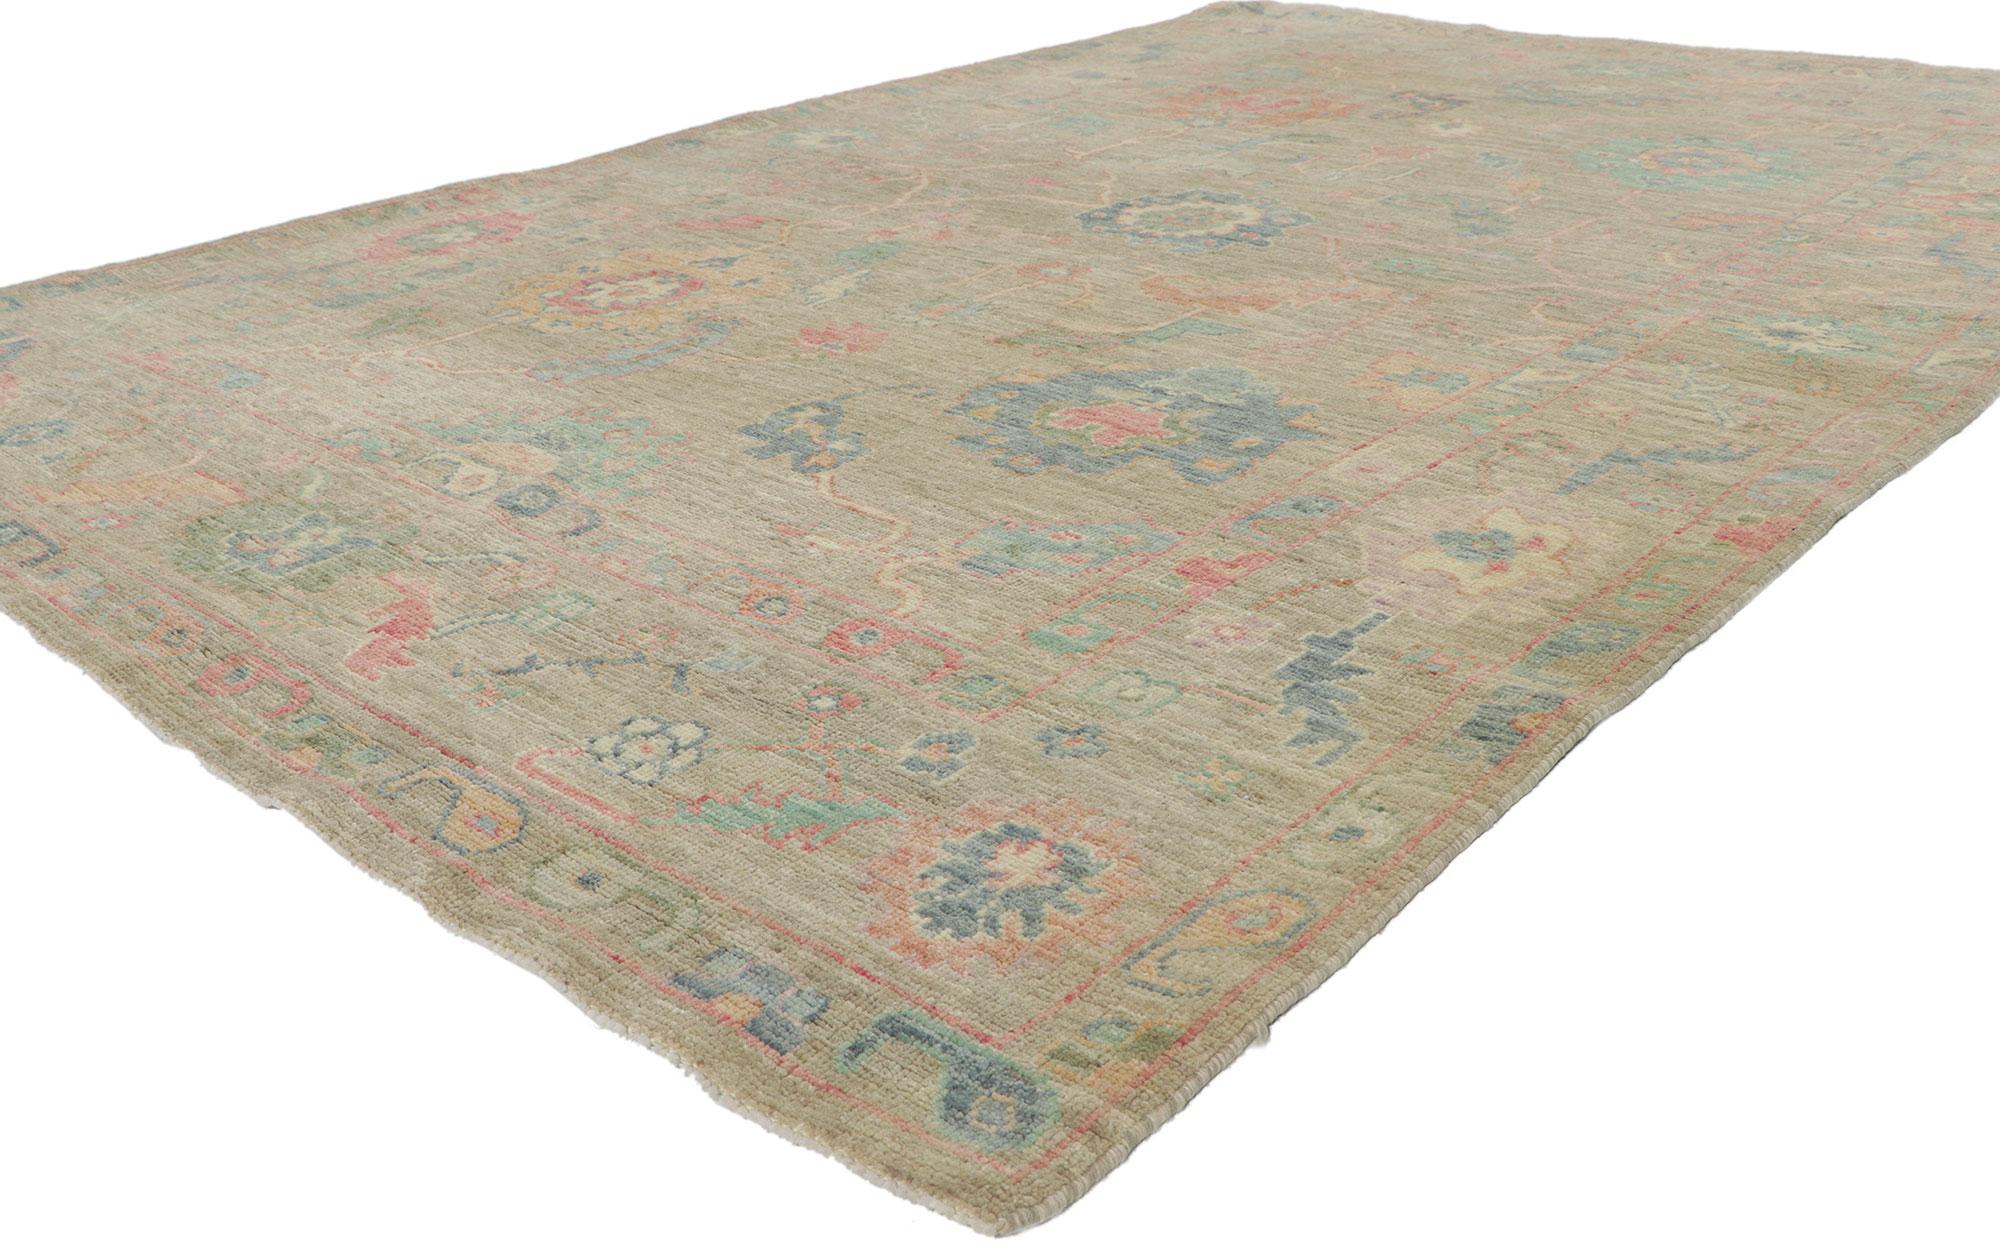 80891 New Modern Style Oushak rug with Soft Colors, 05'10 x 08'10. Polished and playful, this hand-knotted wool contemporary Contemporary Oushak rug beautifully embodies a modern style. The composition features an all-over botanical pattern composed